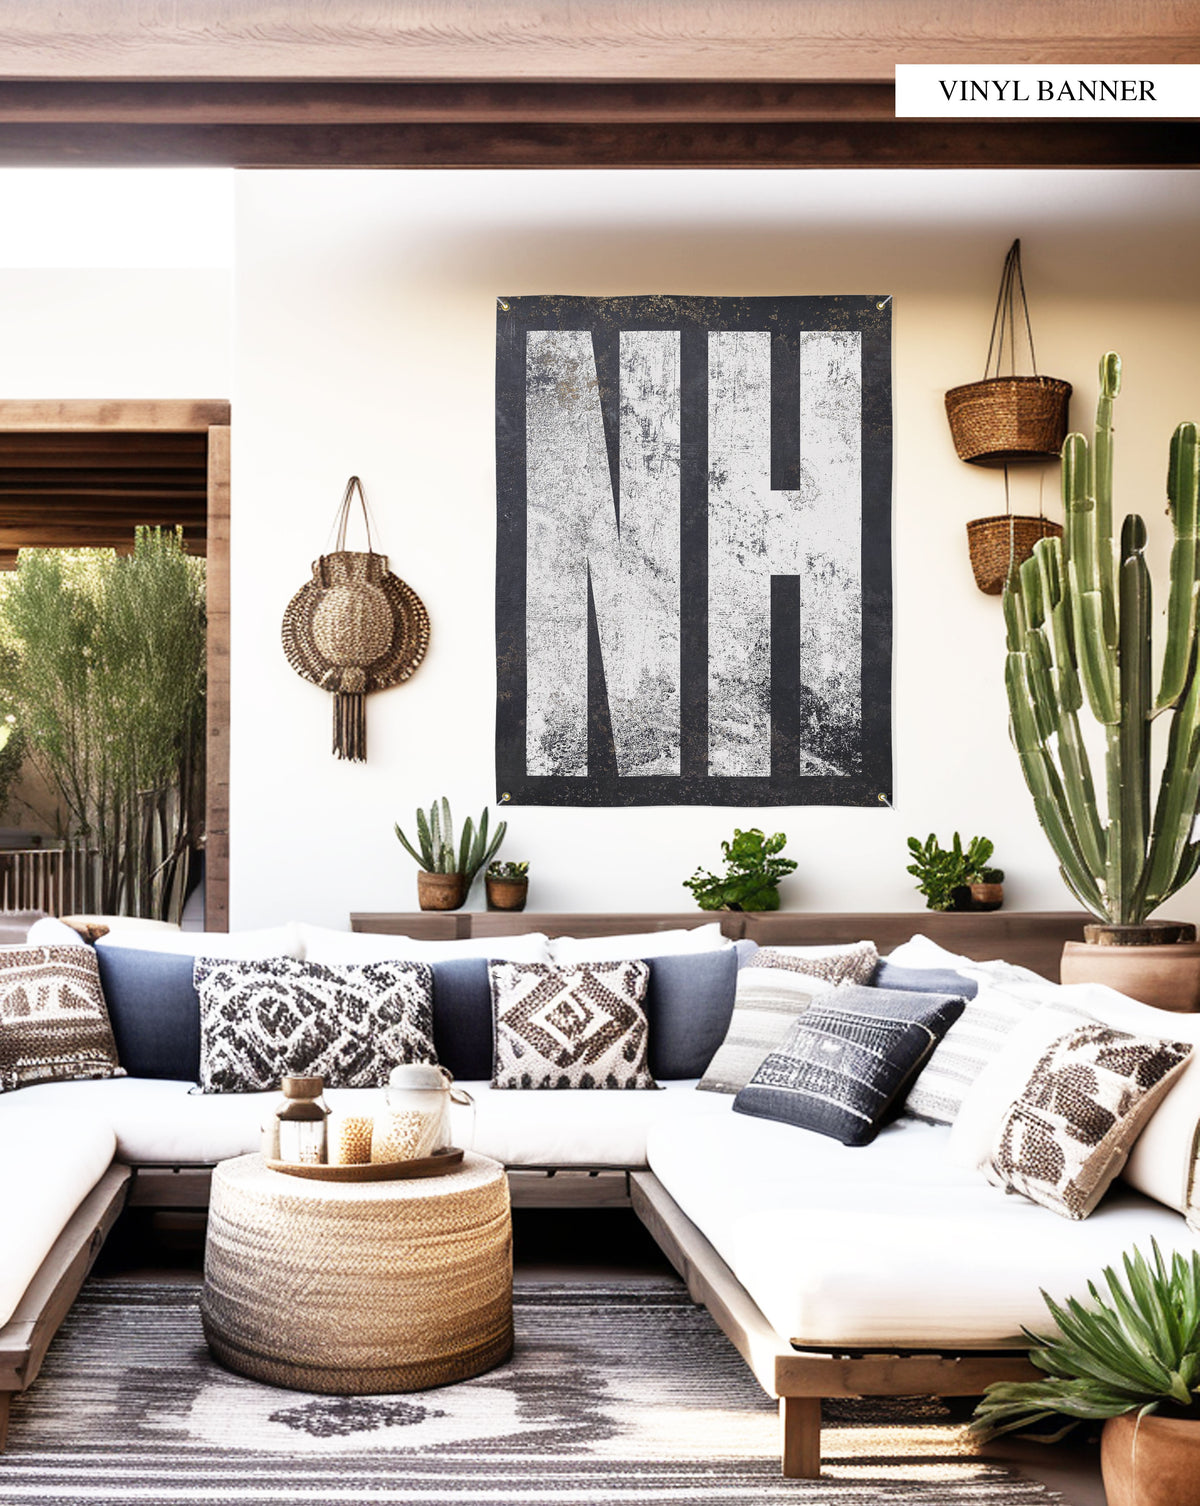 "Showcase New Hampshire's enduring charm with this easy-to-install 'NH' vinyl banner, designed to bring a touch of elegance to both indoor and outdoor spaces."